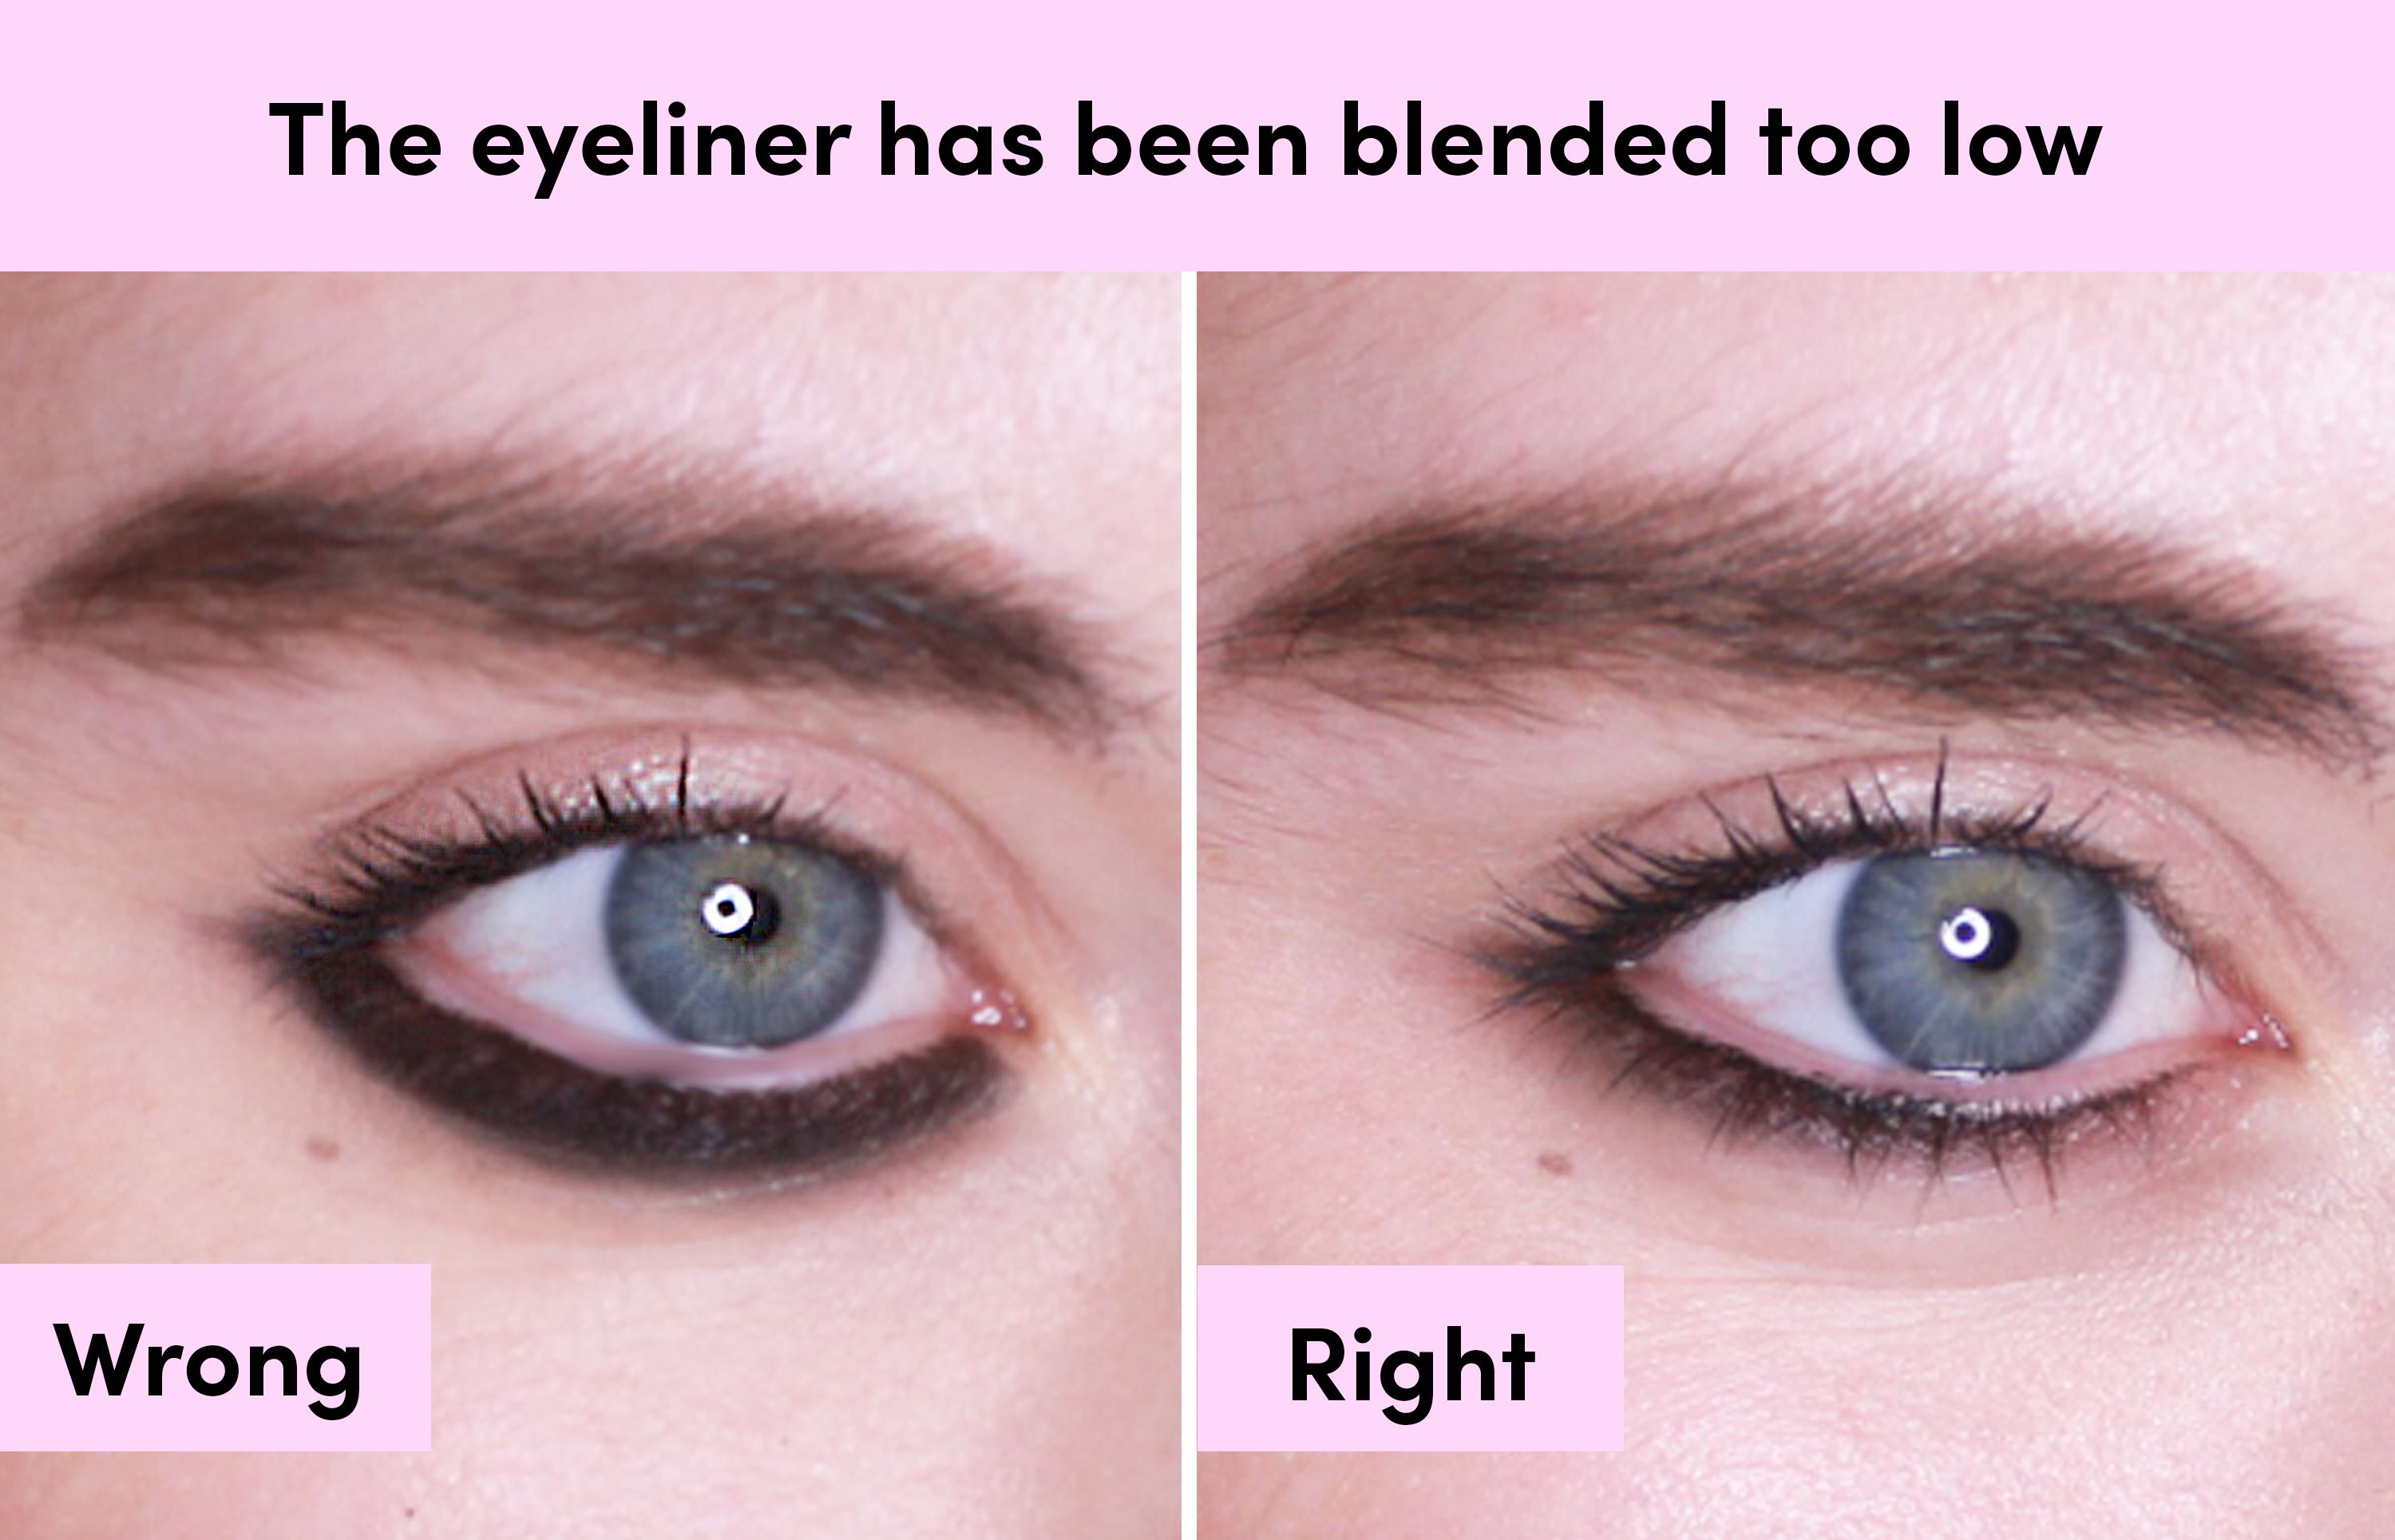 How to apply eyeliner - 7 mistakes to avoid